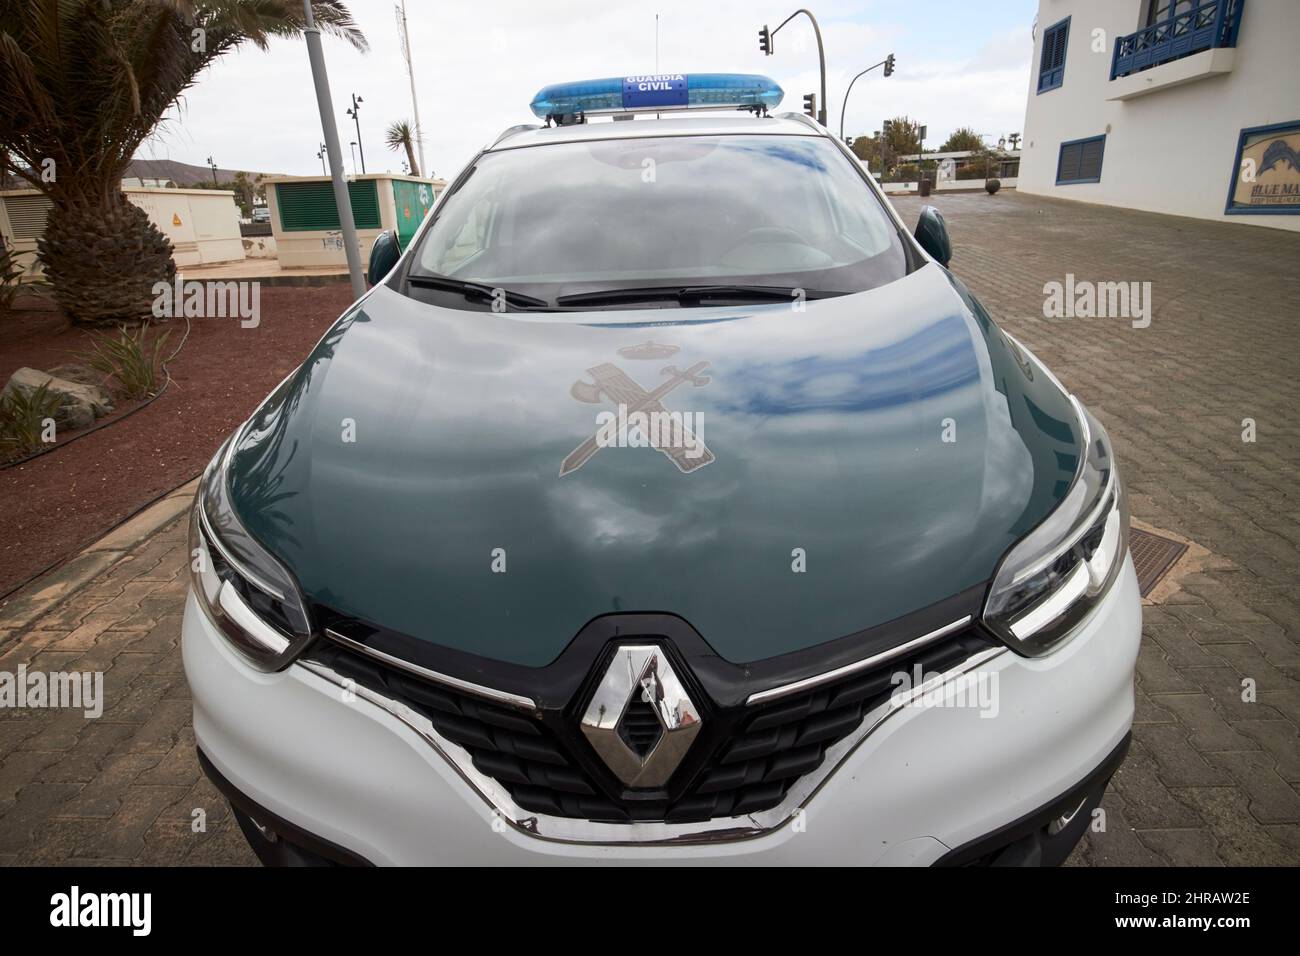 guardia civil national police force patrol vehicle Lanzarote, Canary Islands, Spain Stock Photo